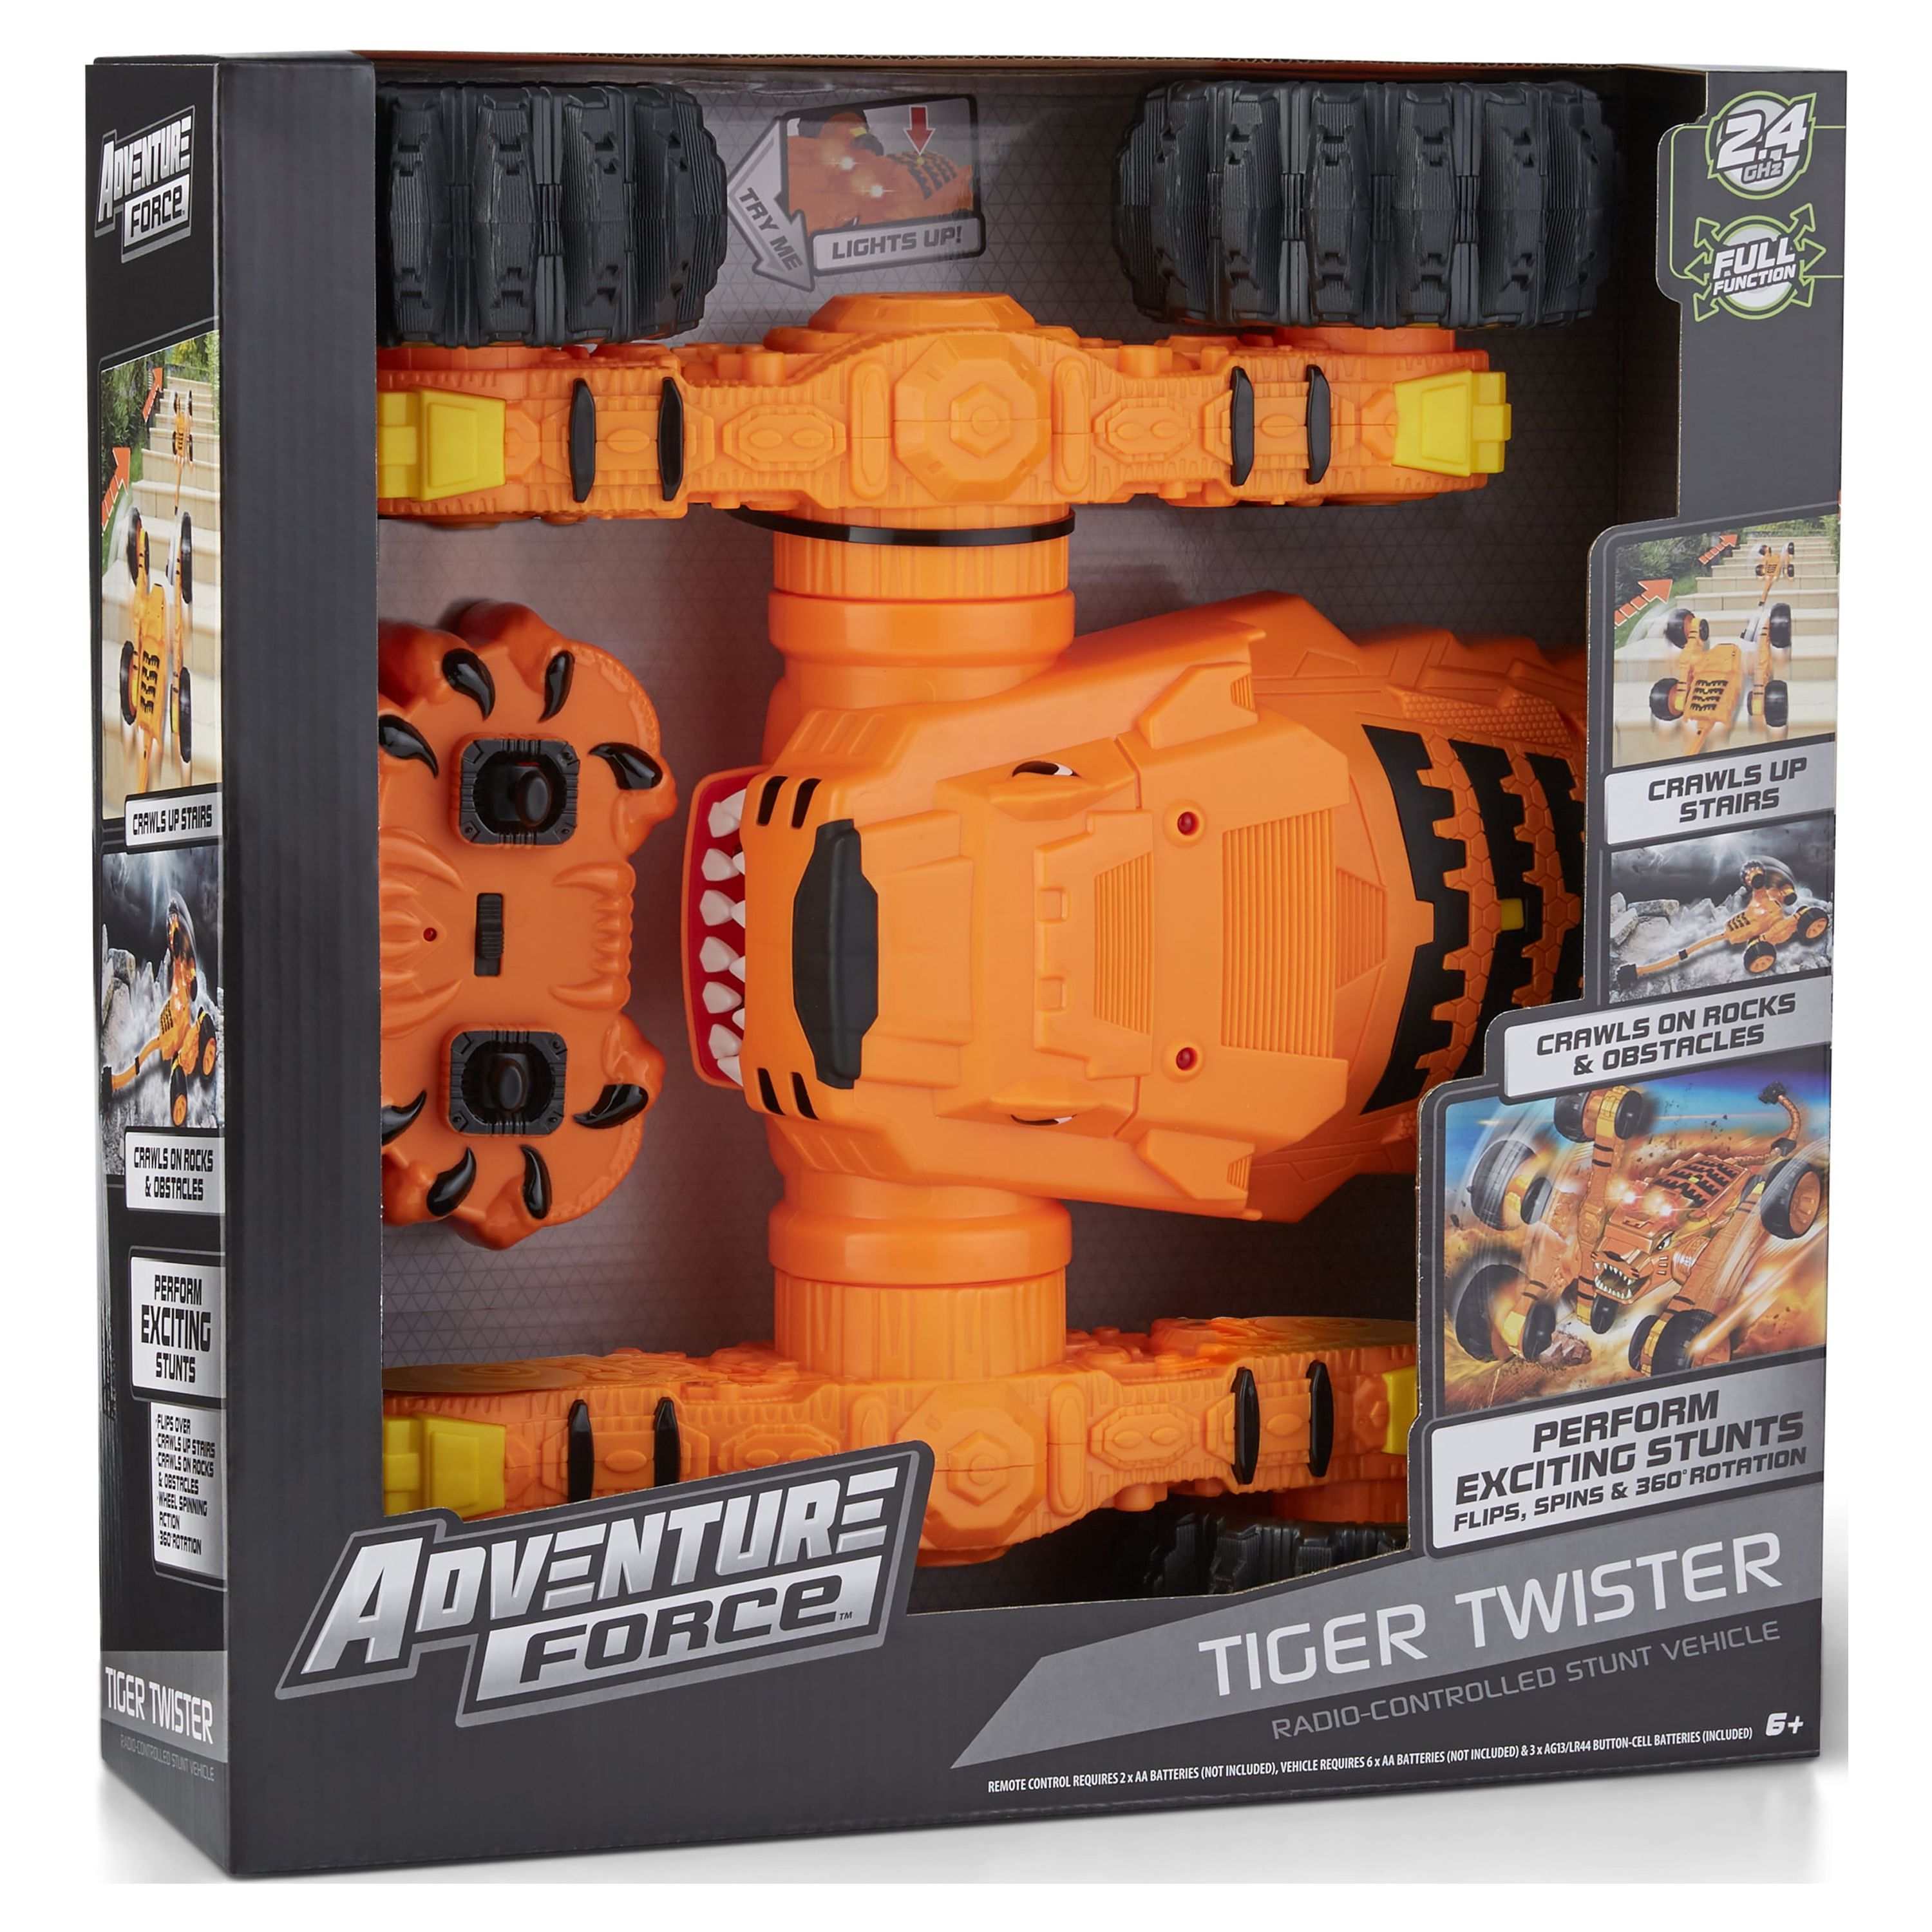 Adventure Force Tiger Twister Radio Controlled Stunt Vehicle - image 1 of 6